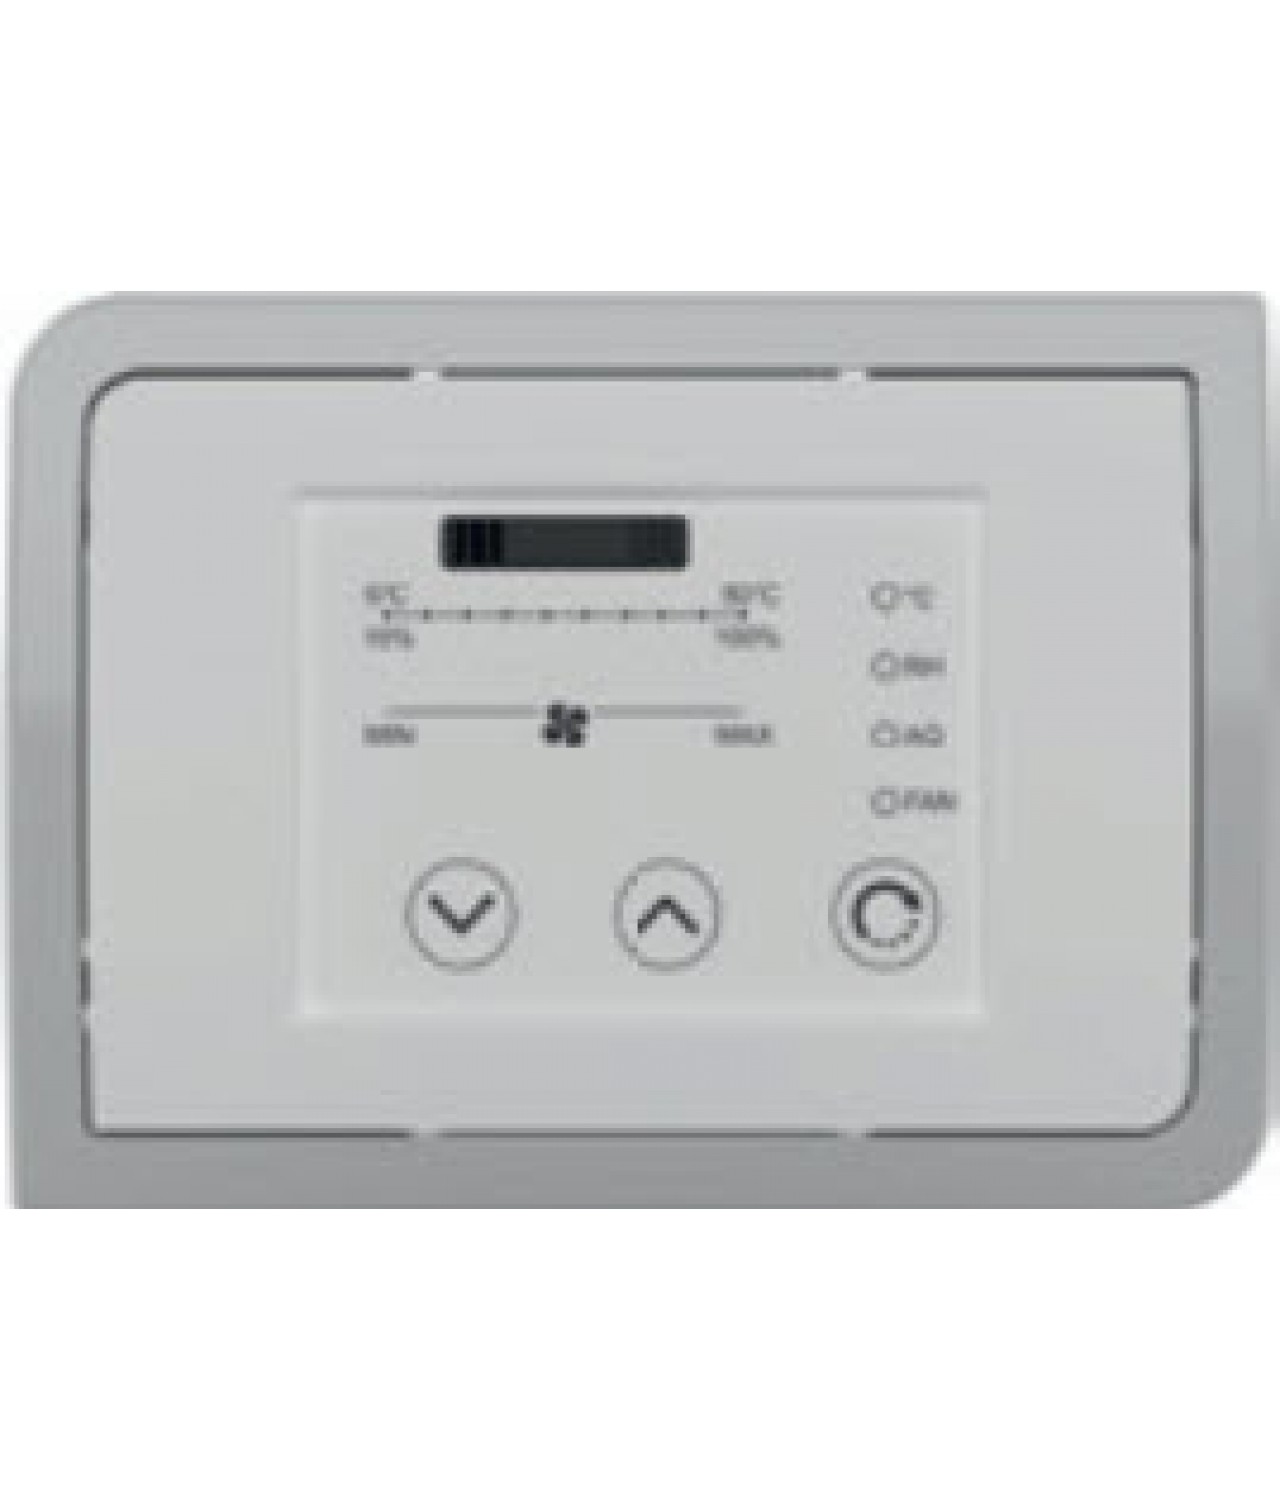 CP-AQS control panel with air quality, humidity and temperature sensor included